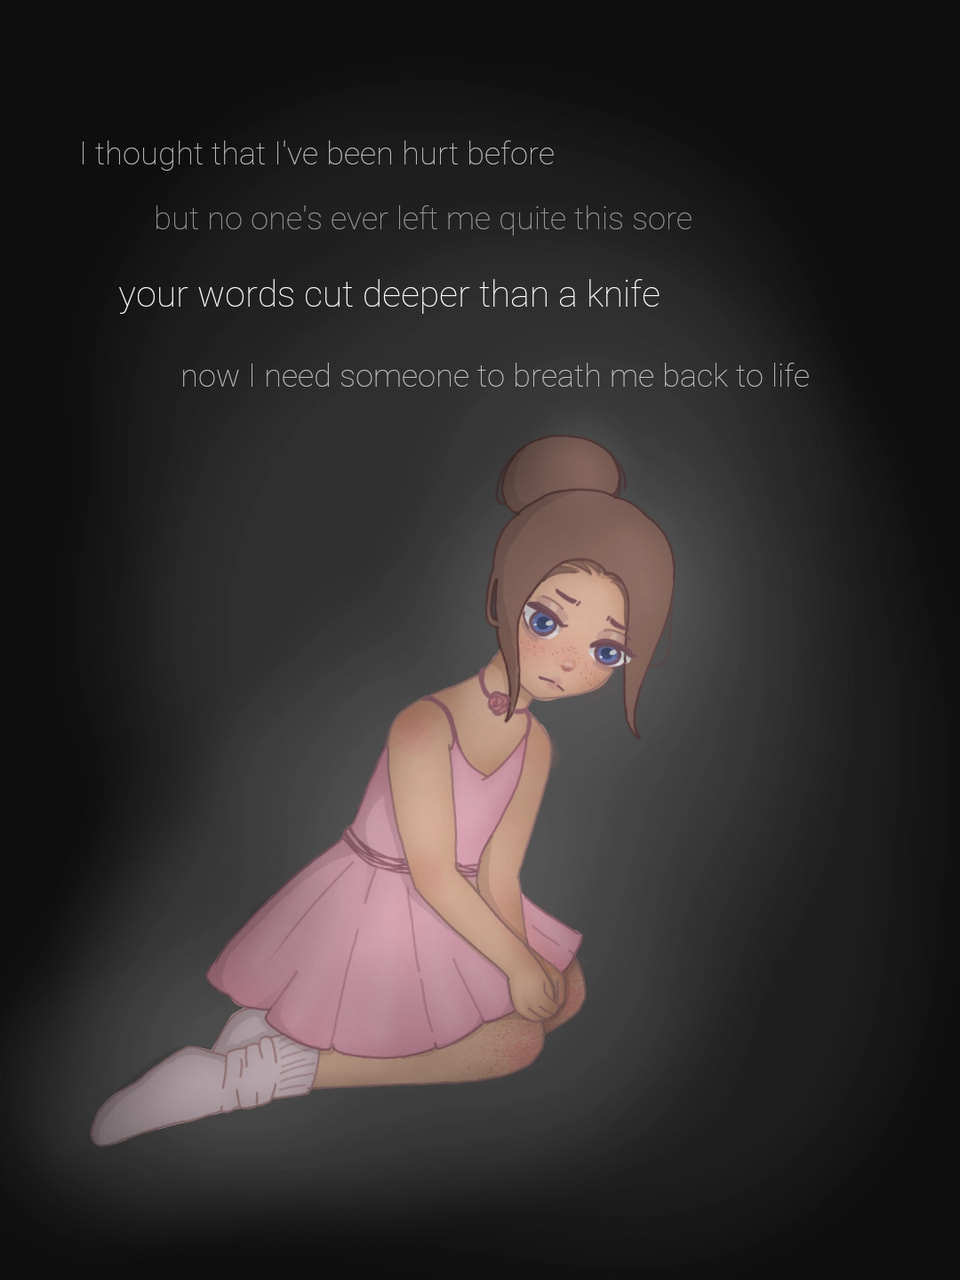 My entry for the #musicchallenge it's »Stitches« by shawn mendes♡ • oh boi this girl look's way too sad X3 (sorry for not posting these last few days, I was quite busy) #Stitches  #fridayswithsketch #Ballerina #song #100PercentSketch